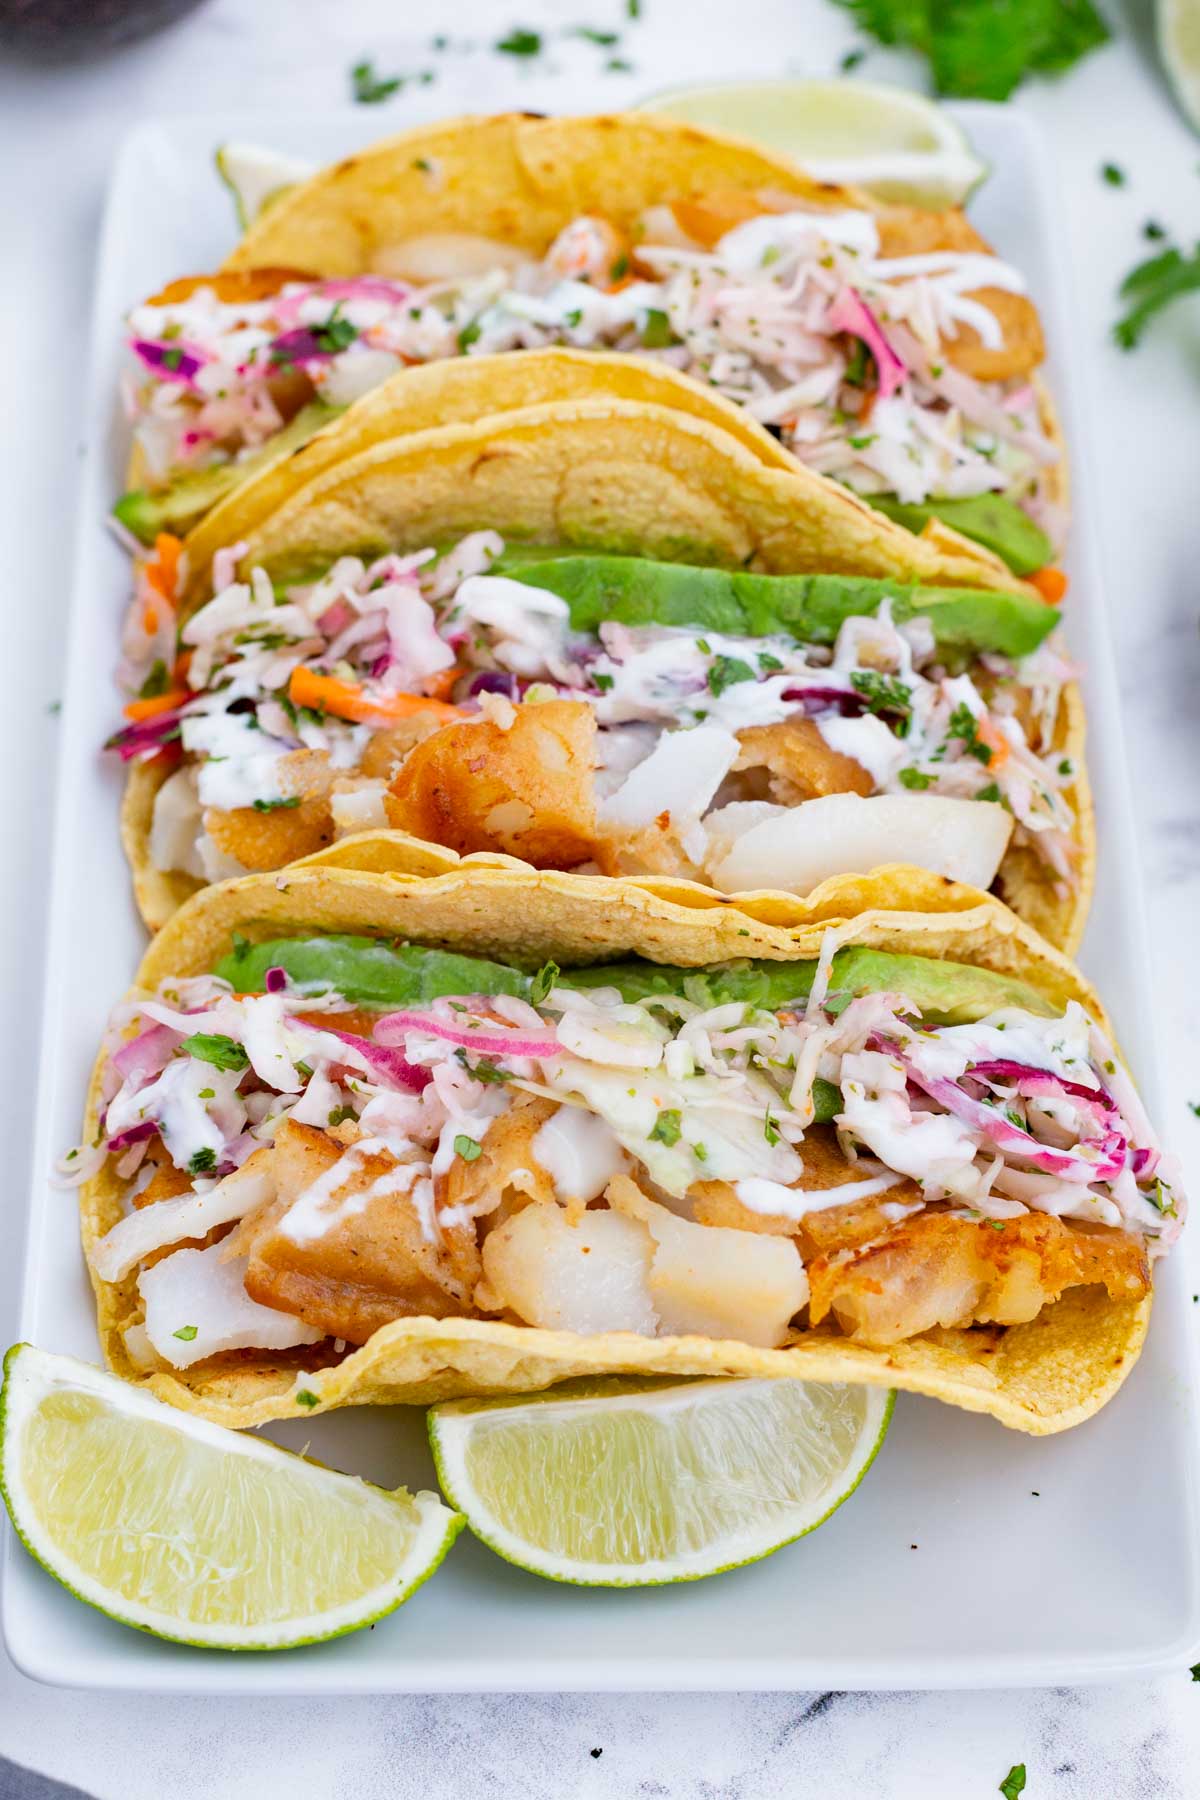 Three Baja fish tacos are served with fresh lime wedges.